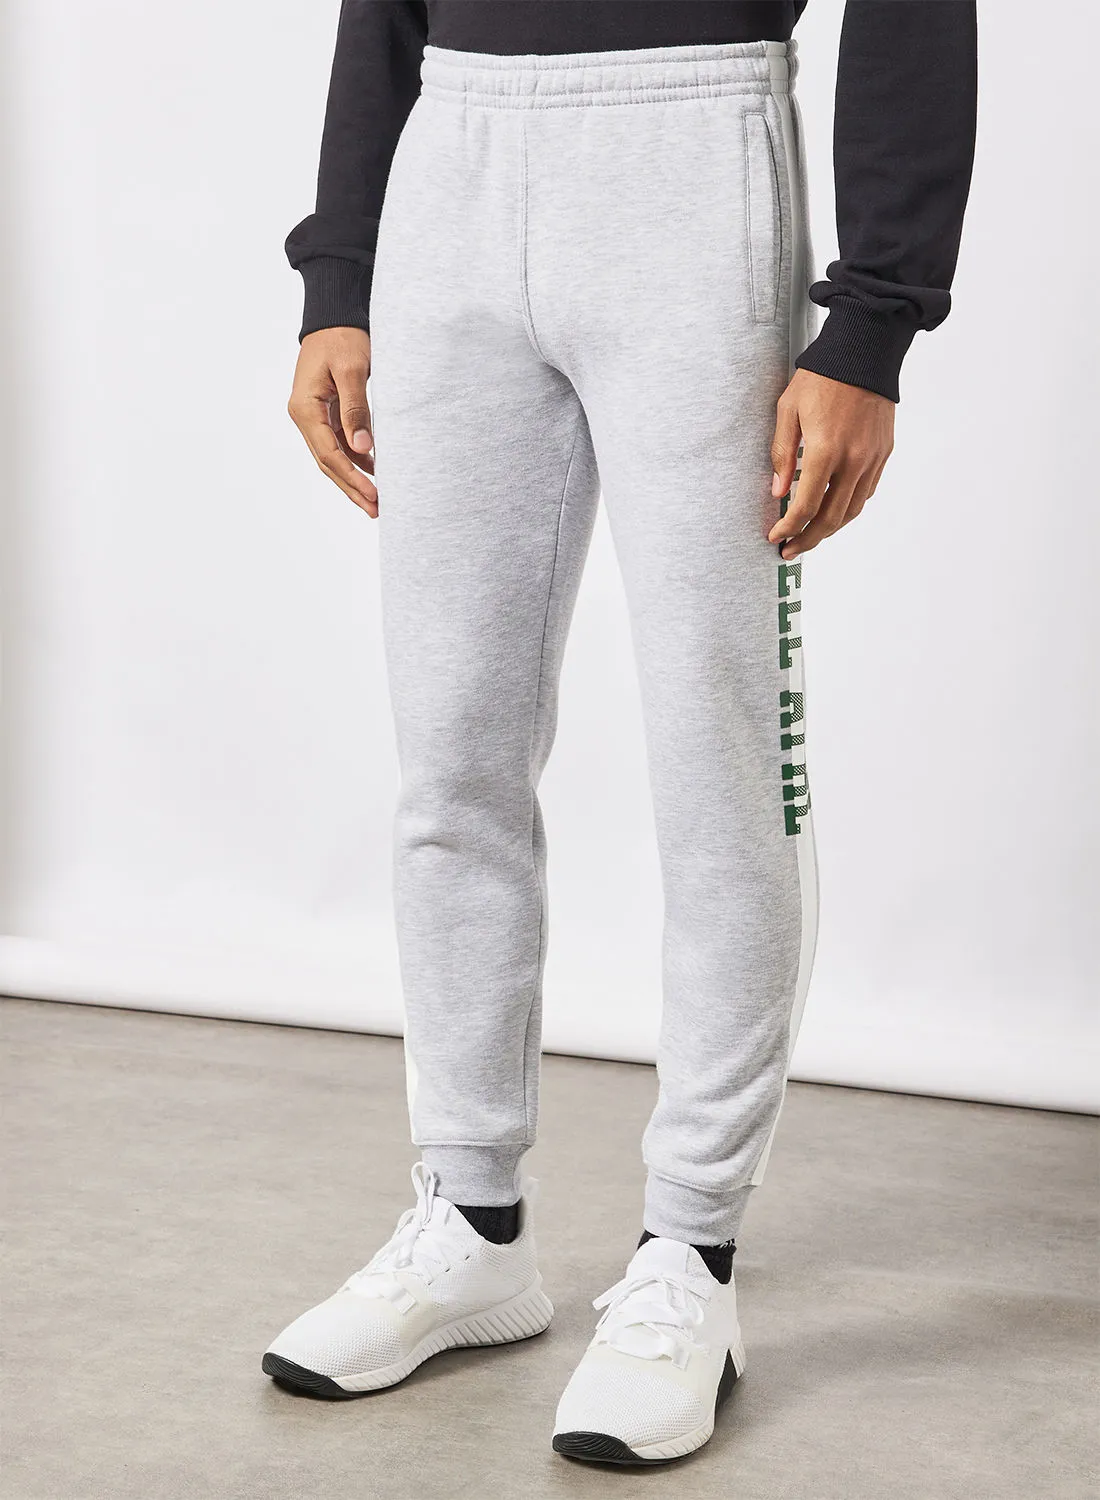 Russell Athletic Contrast Stripe Sweatpants Grey